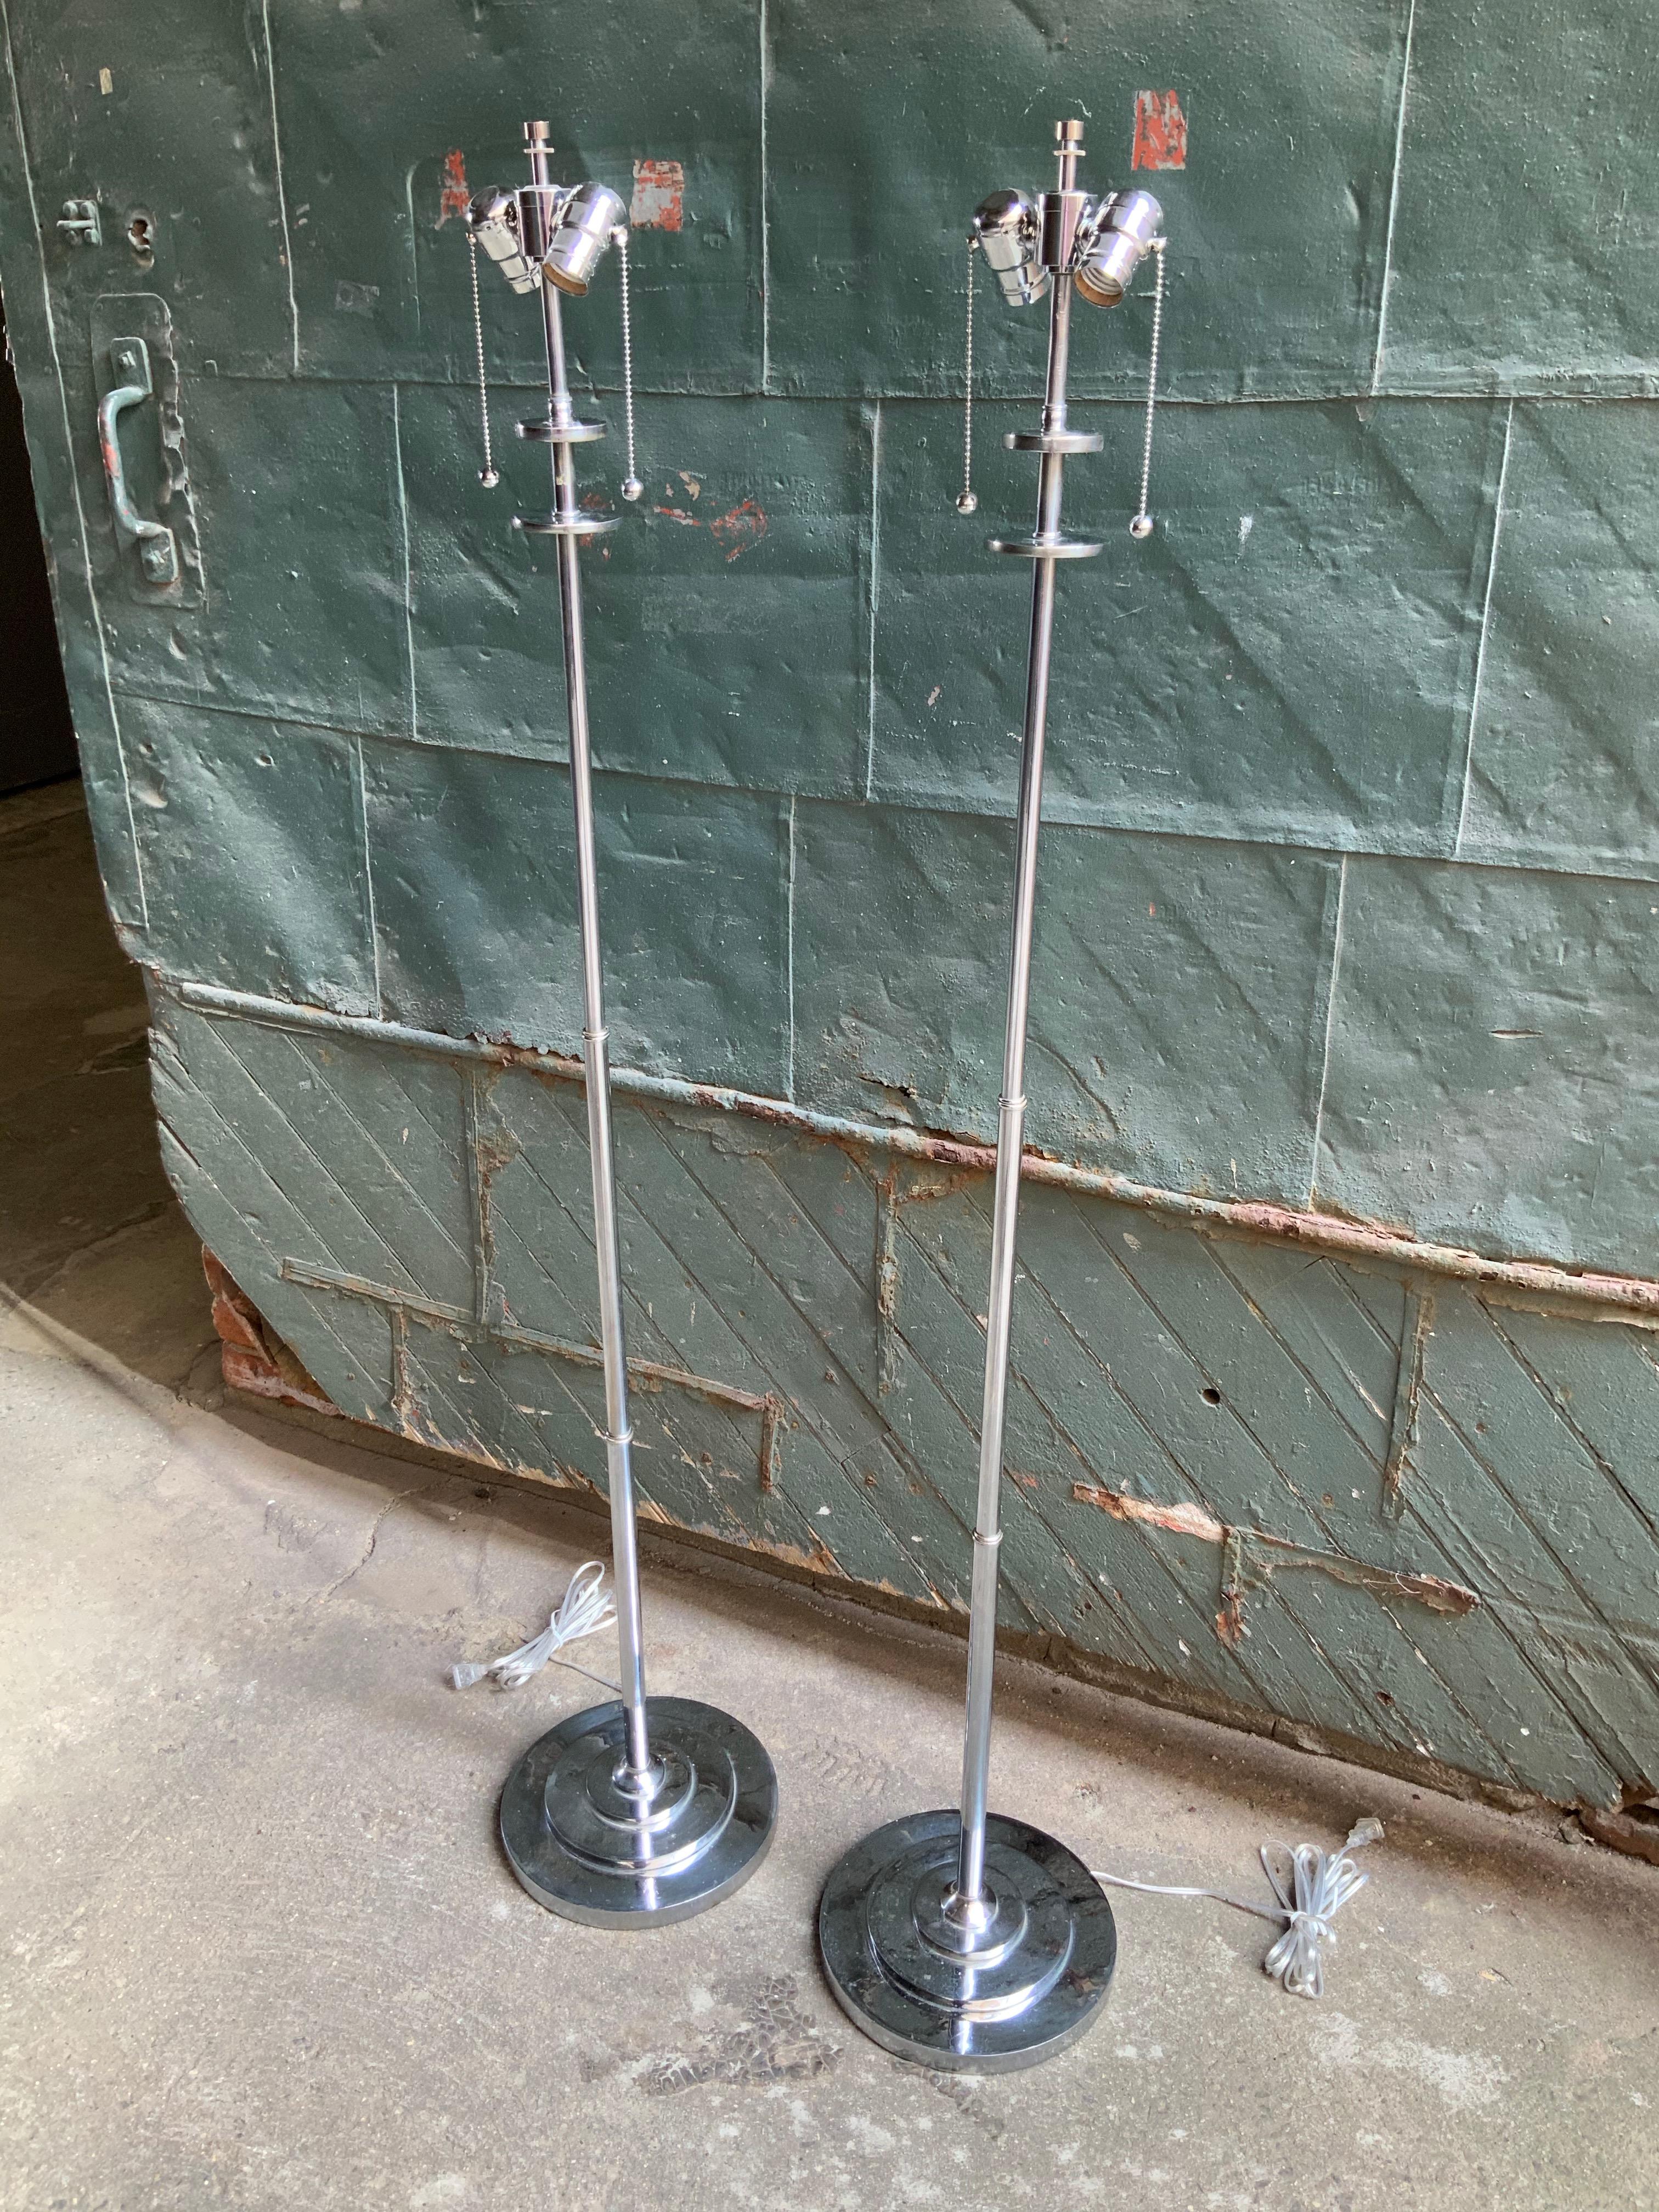 A wonderful pair of nickel plate Machine Age floor lamps, circa 1930-1935. Newly rewired and new bulb sockets. Minimalist design. Weighted base. Shades not included. Good overall condition with some light pitting to bases.

Measures: Approximately